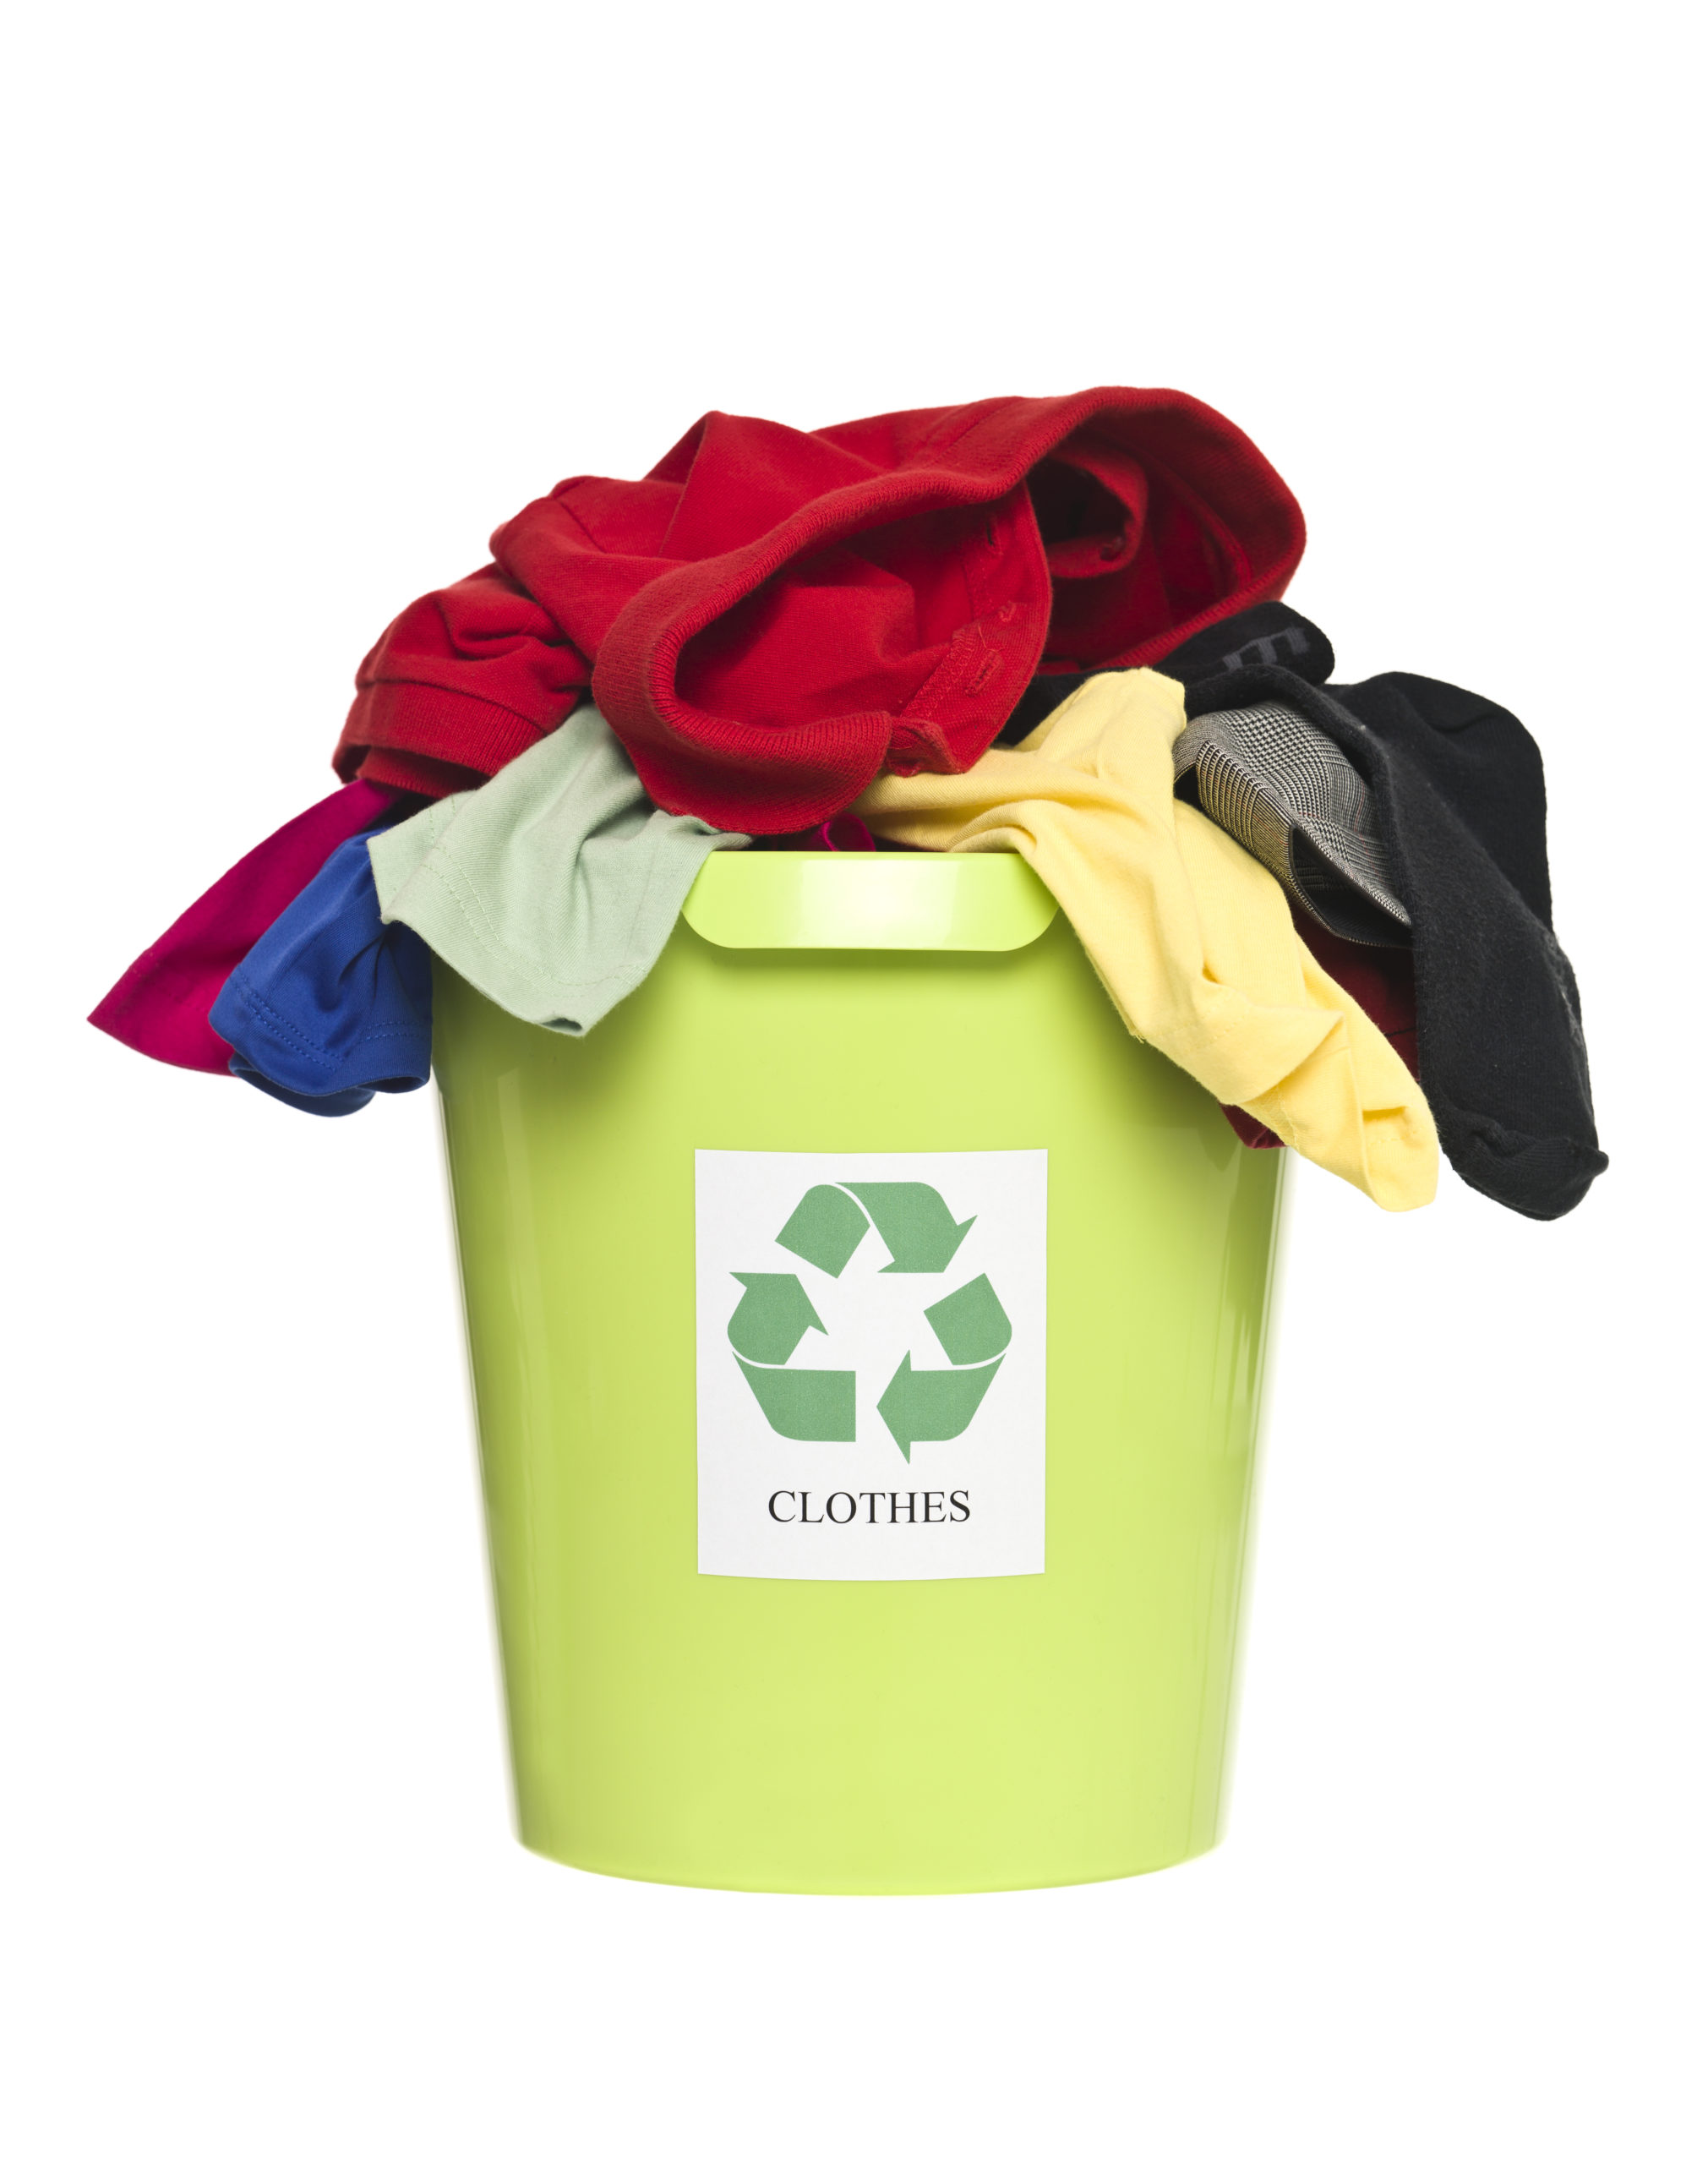 What to do with your old underwear and socks - The Zero Waste Family®